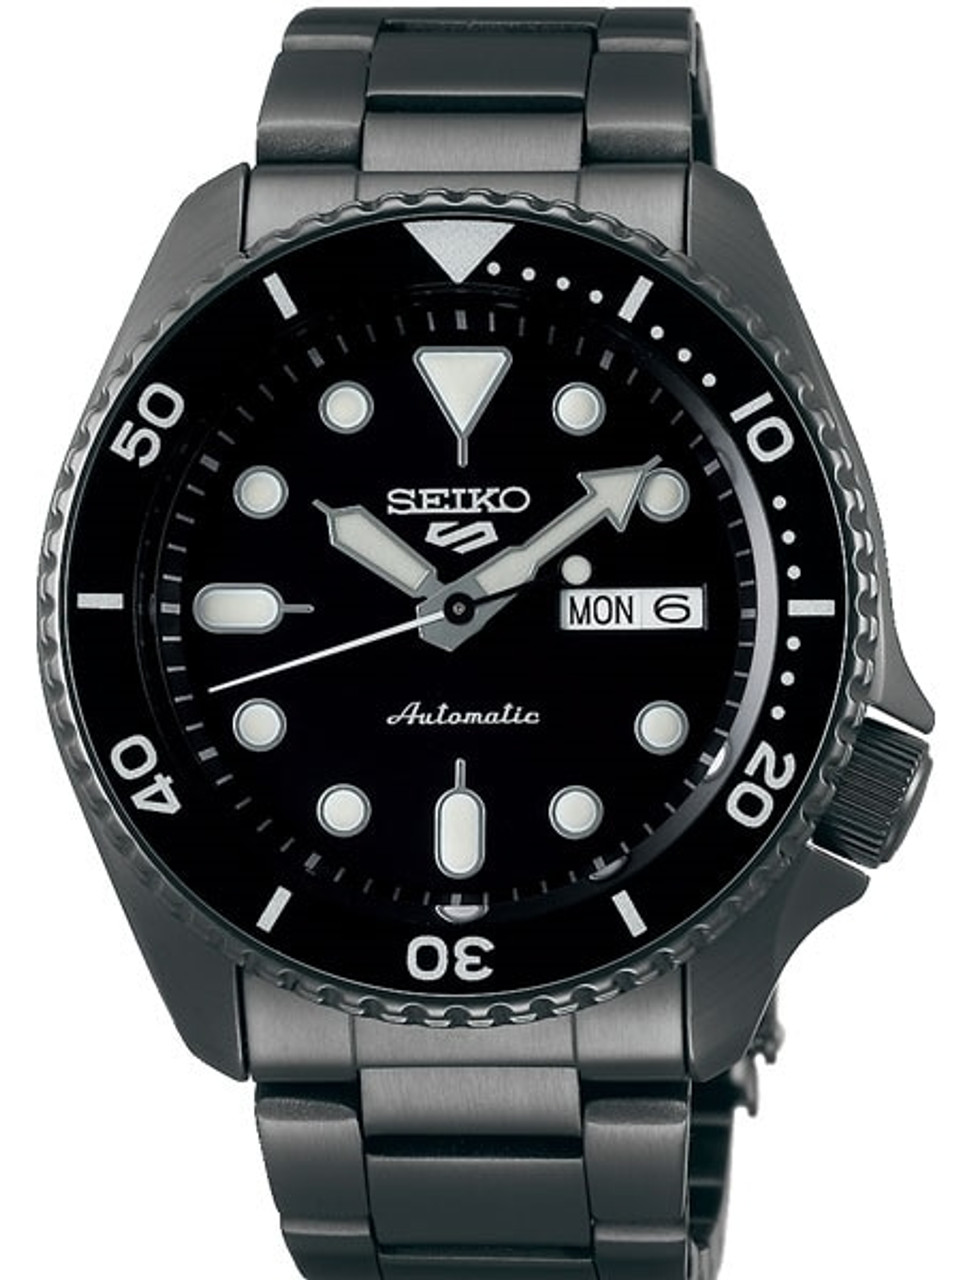 Seiko 5 Sports Automatic 24-Jewel Watch with Black Dial #SRPD65